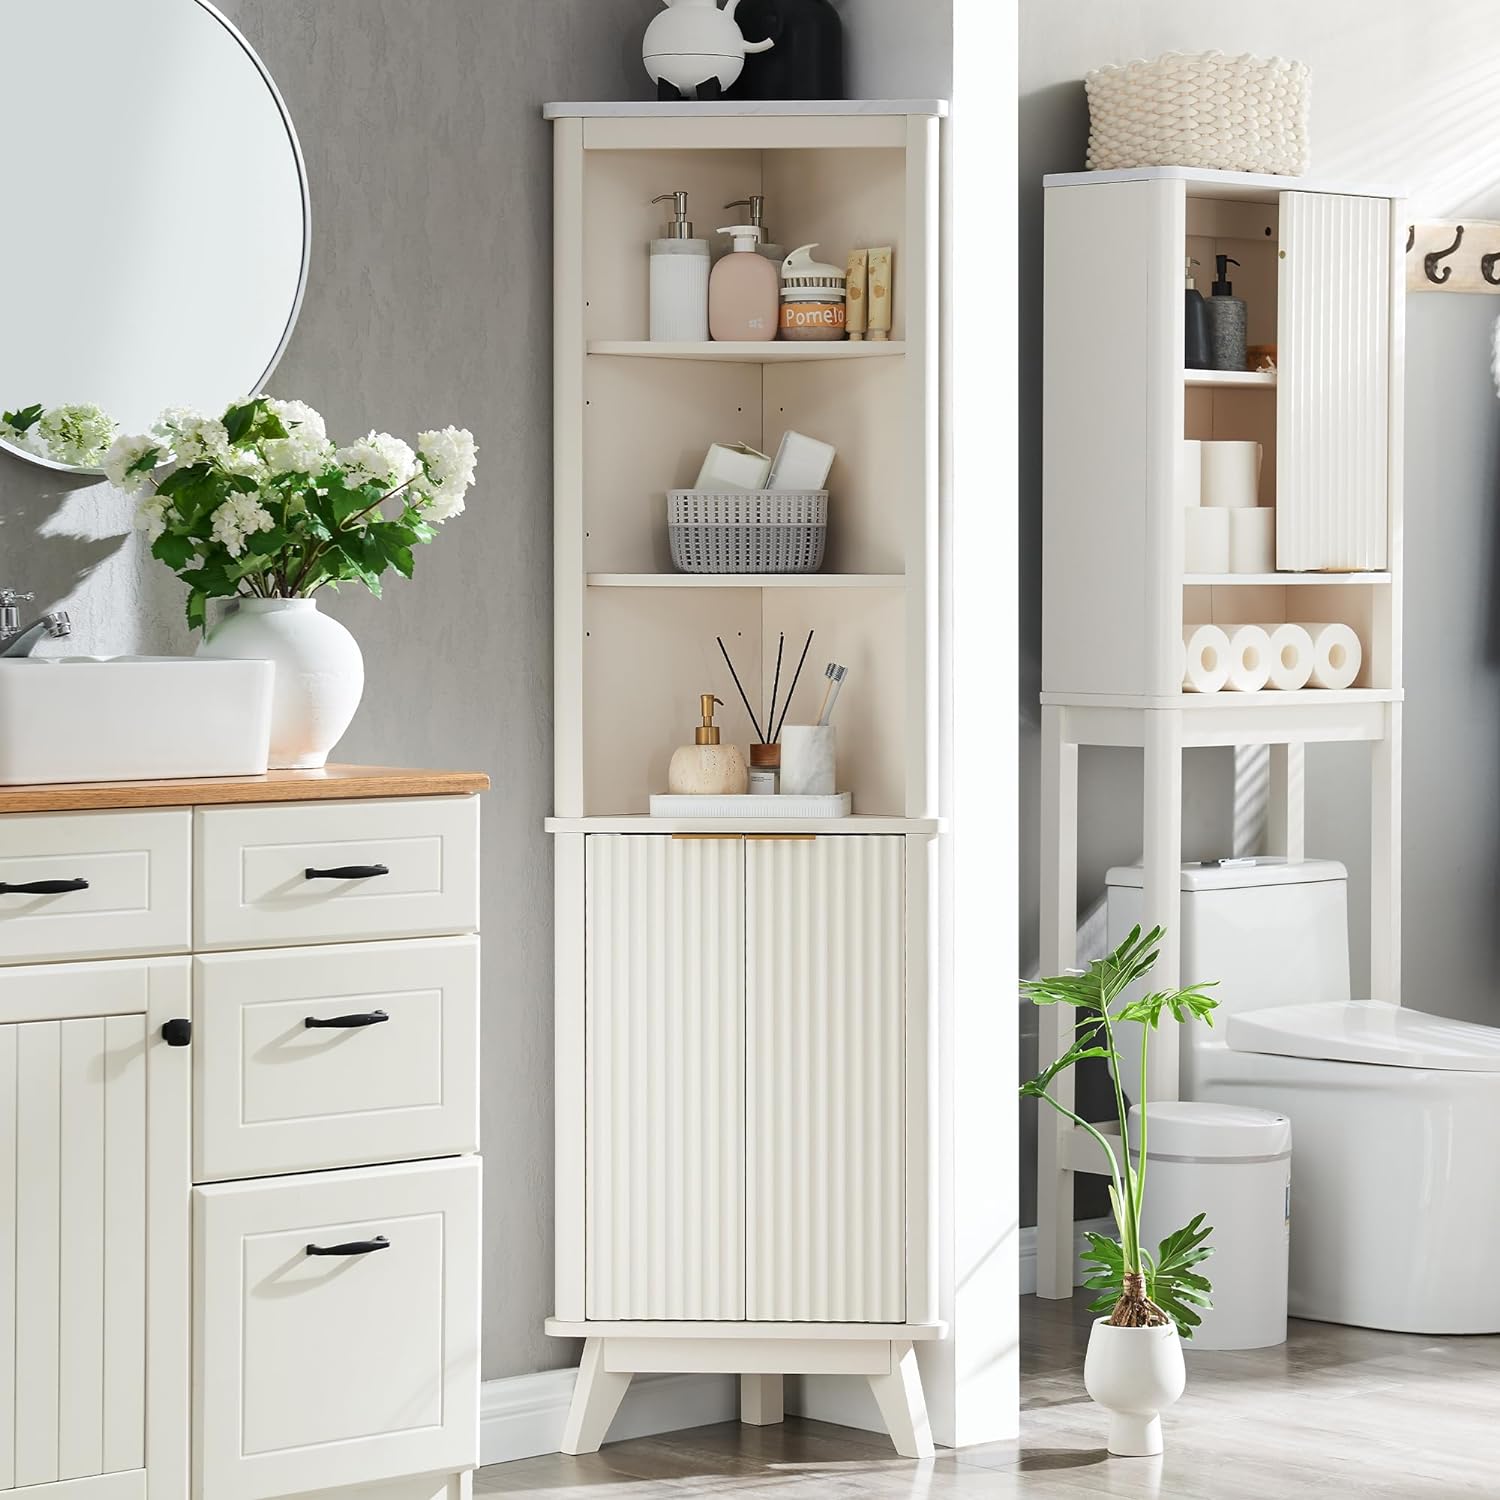 T4TREAM Fluted Corner Cabinet, 68 Tall Modern Storage Cabinet with Faux Marble Top and Adjustable Shelves, Curved Profile Bookshelf for Bathroom, Kitchen, Living Room, Dining Room, Off White